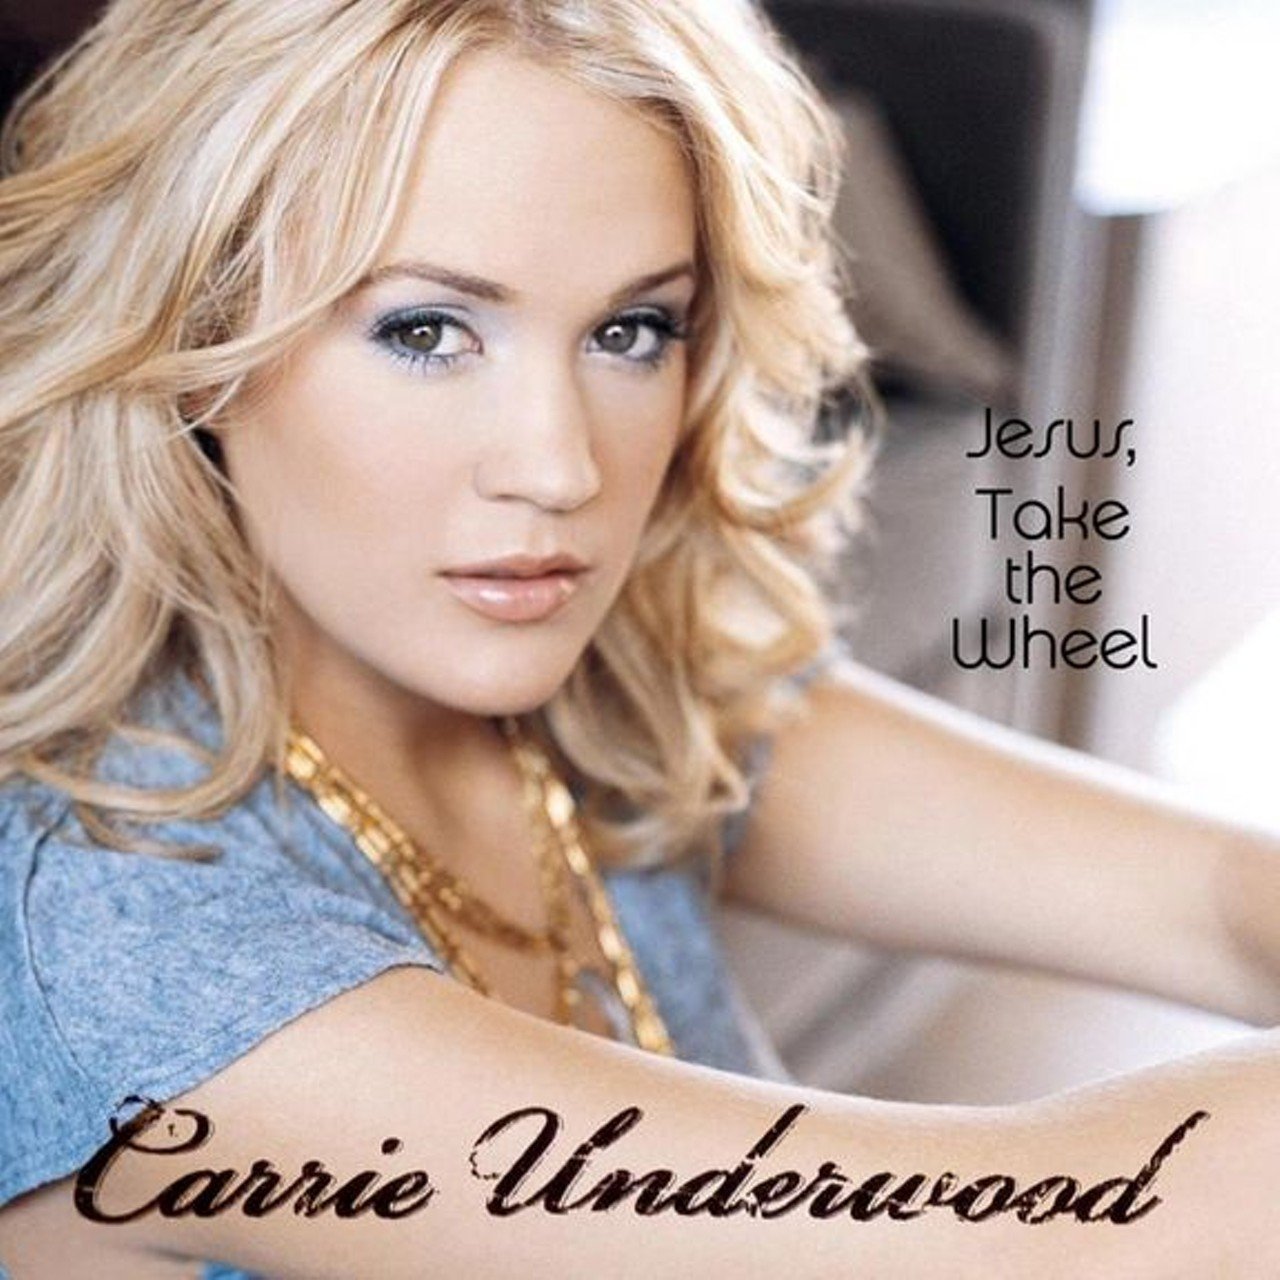 "Jesus Take the Wheel" by Carrie Underwood
She was driving last Friday on her way to Cincinnati on a snow white Christmas Eve
Going home to see her mama and her daddy with the baby in the backseat